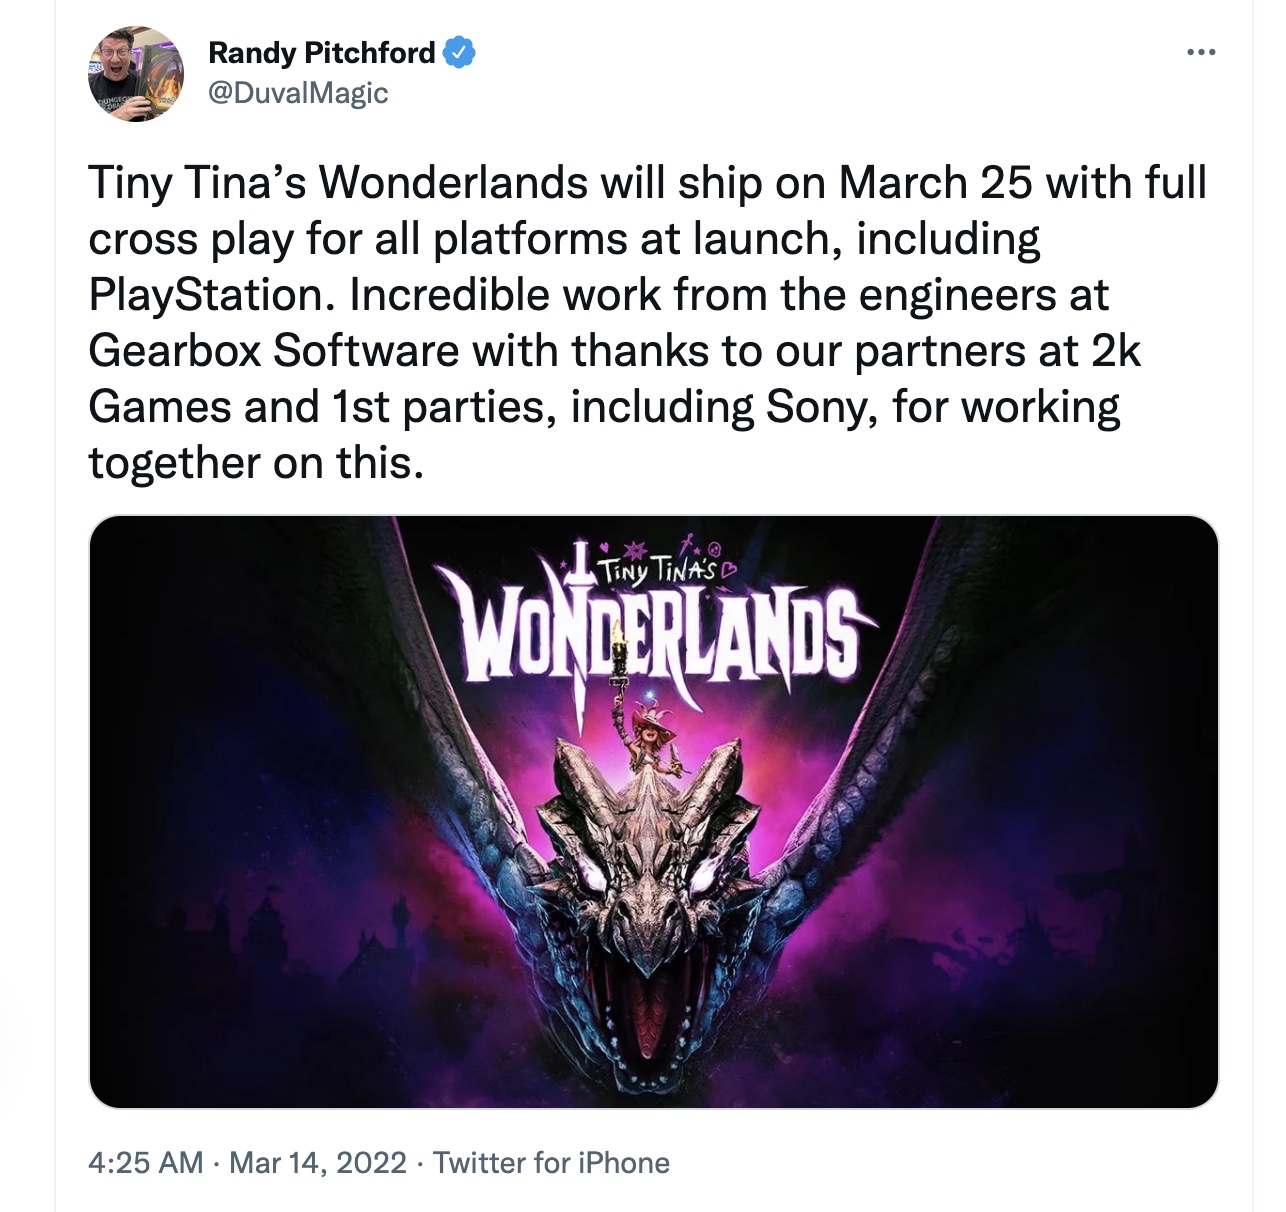 At launch, Tiny Tina's Wonderlands will support crossplay, including on PlayStation